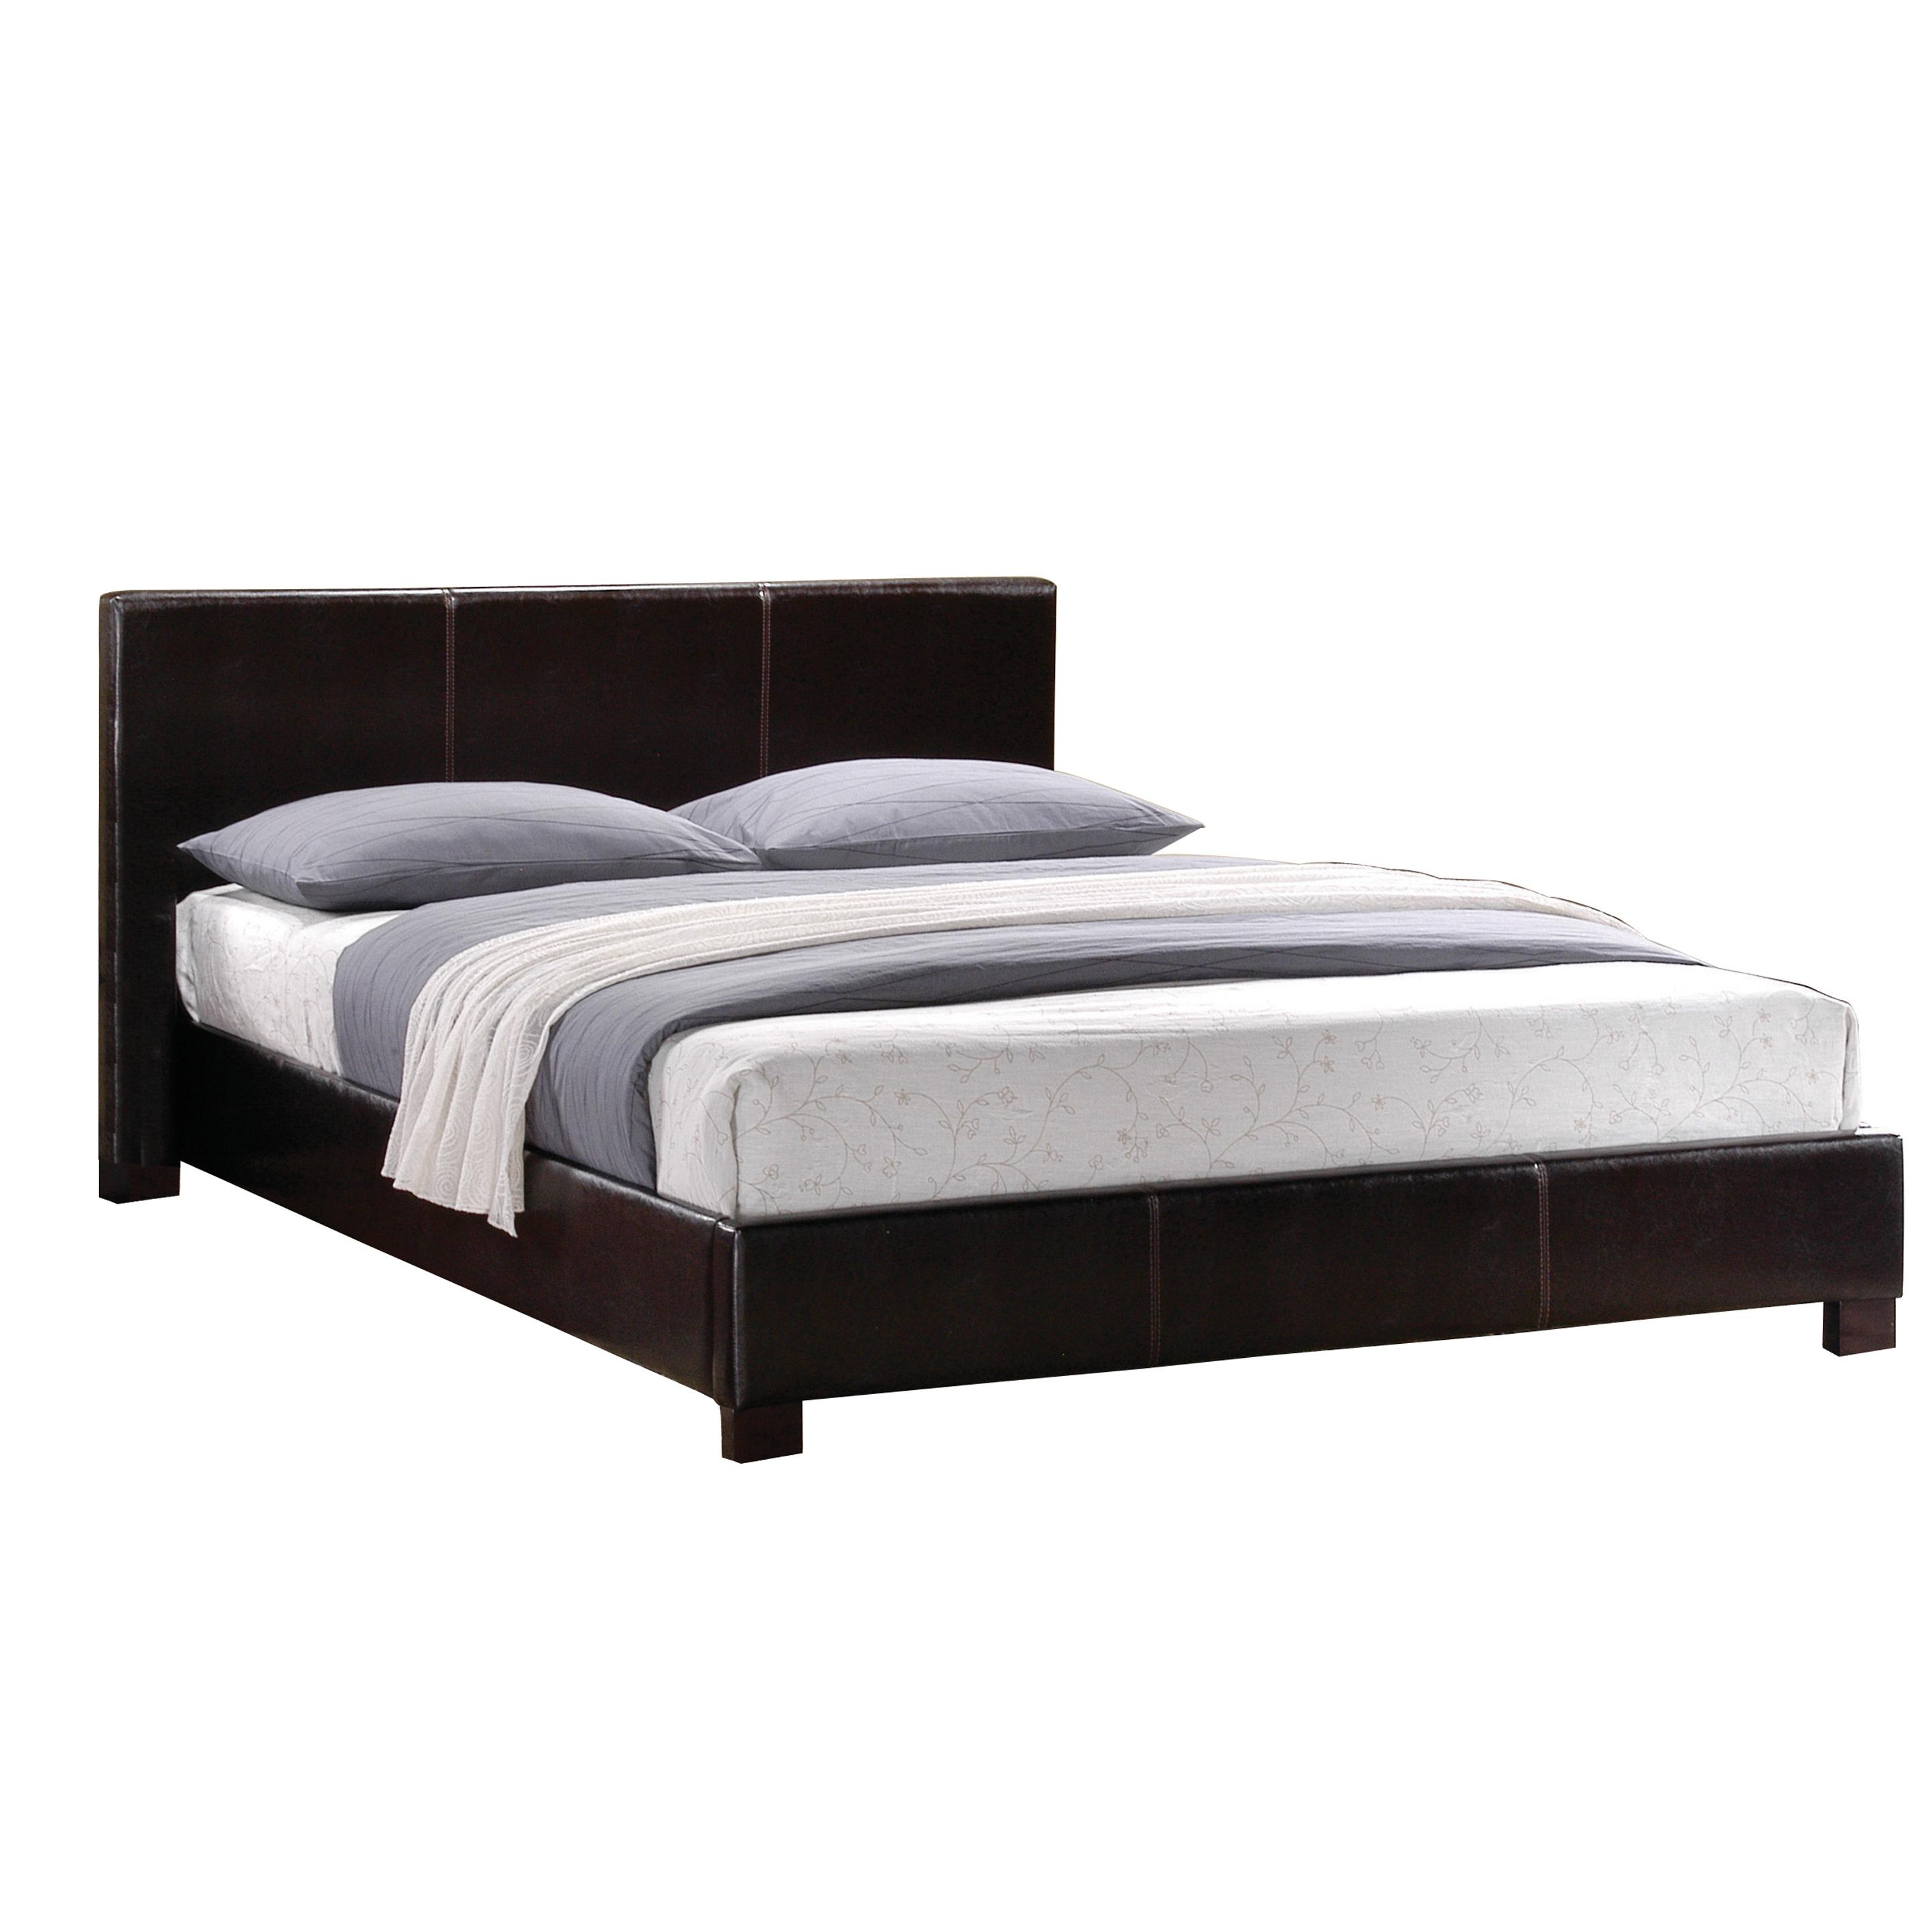 Transitional Bed 5790K-1CK* Zoey 5790K-1CK* in Dark Brown Faux Leather